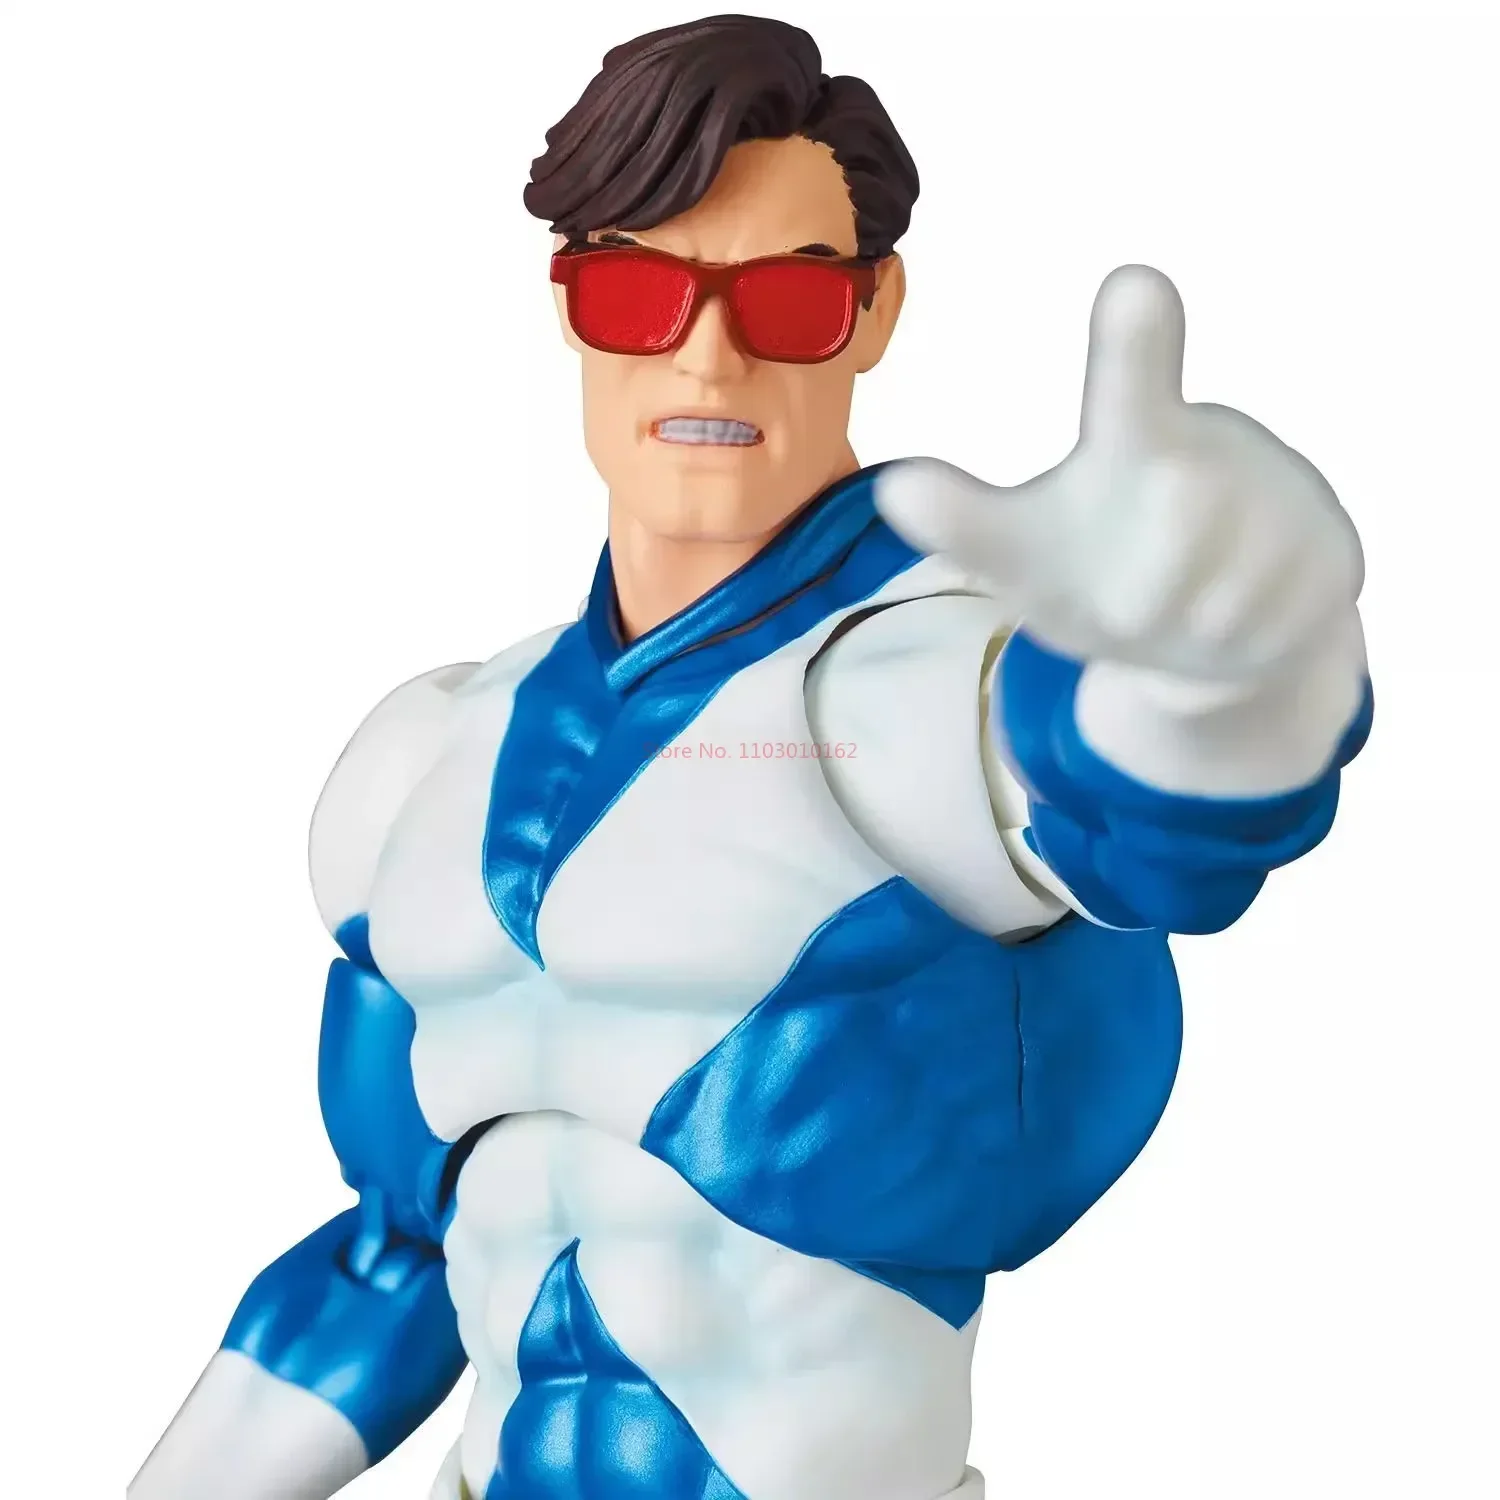 

Marvel Genuine Spot Mafex 173 Comics X-factor Laser Eye 6-inch Action Figure Collect Desktop Ornaments Boy's Funny Birthday Gift